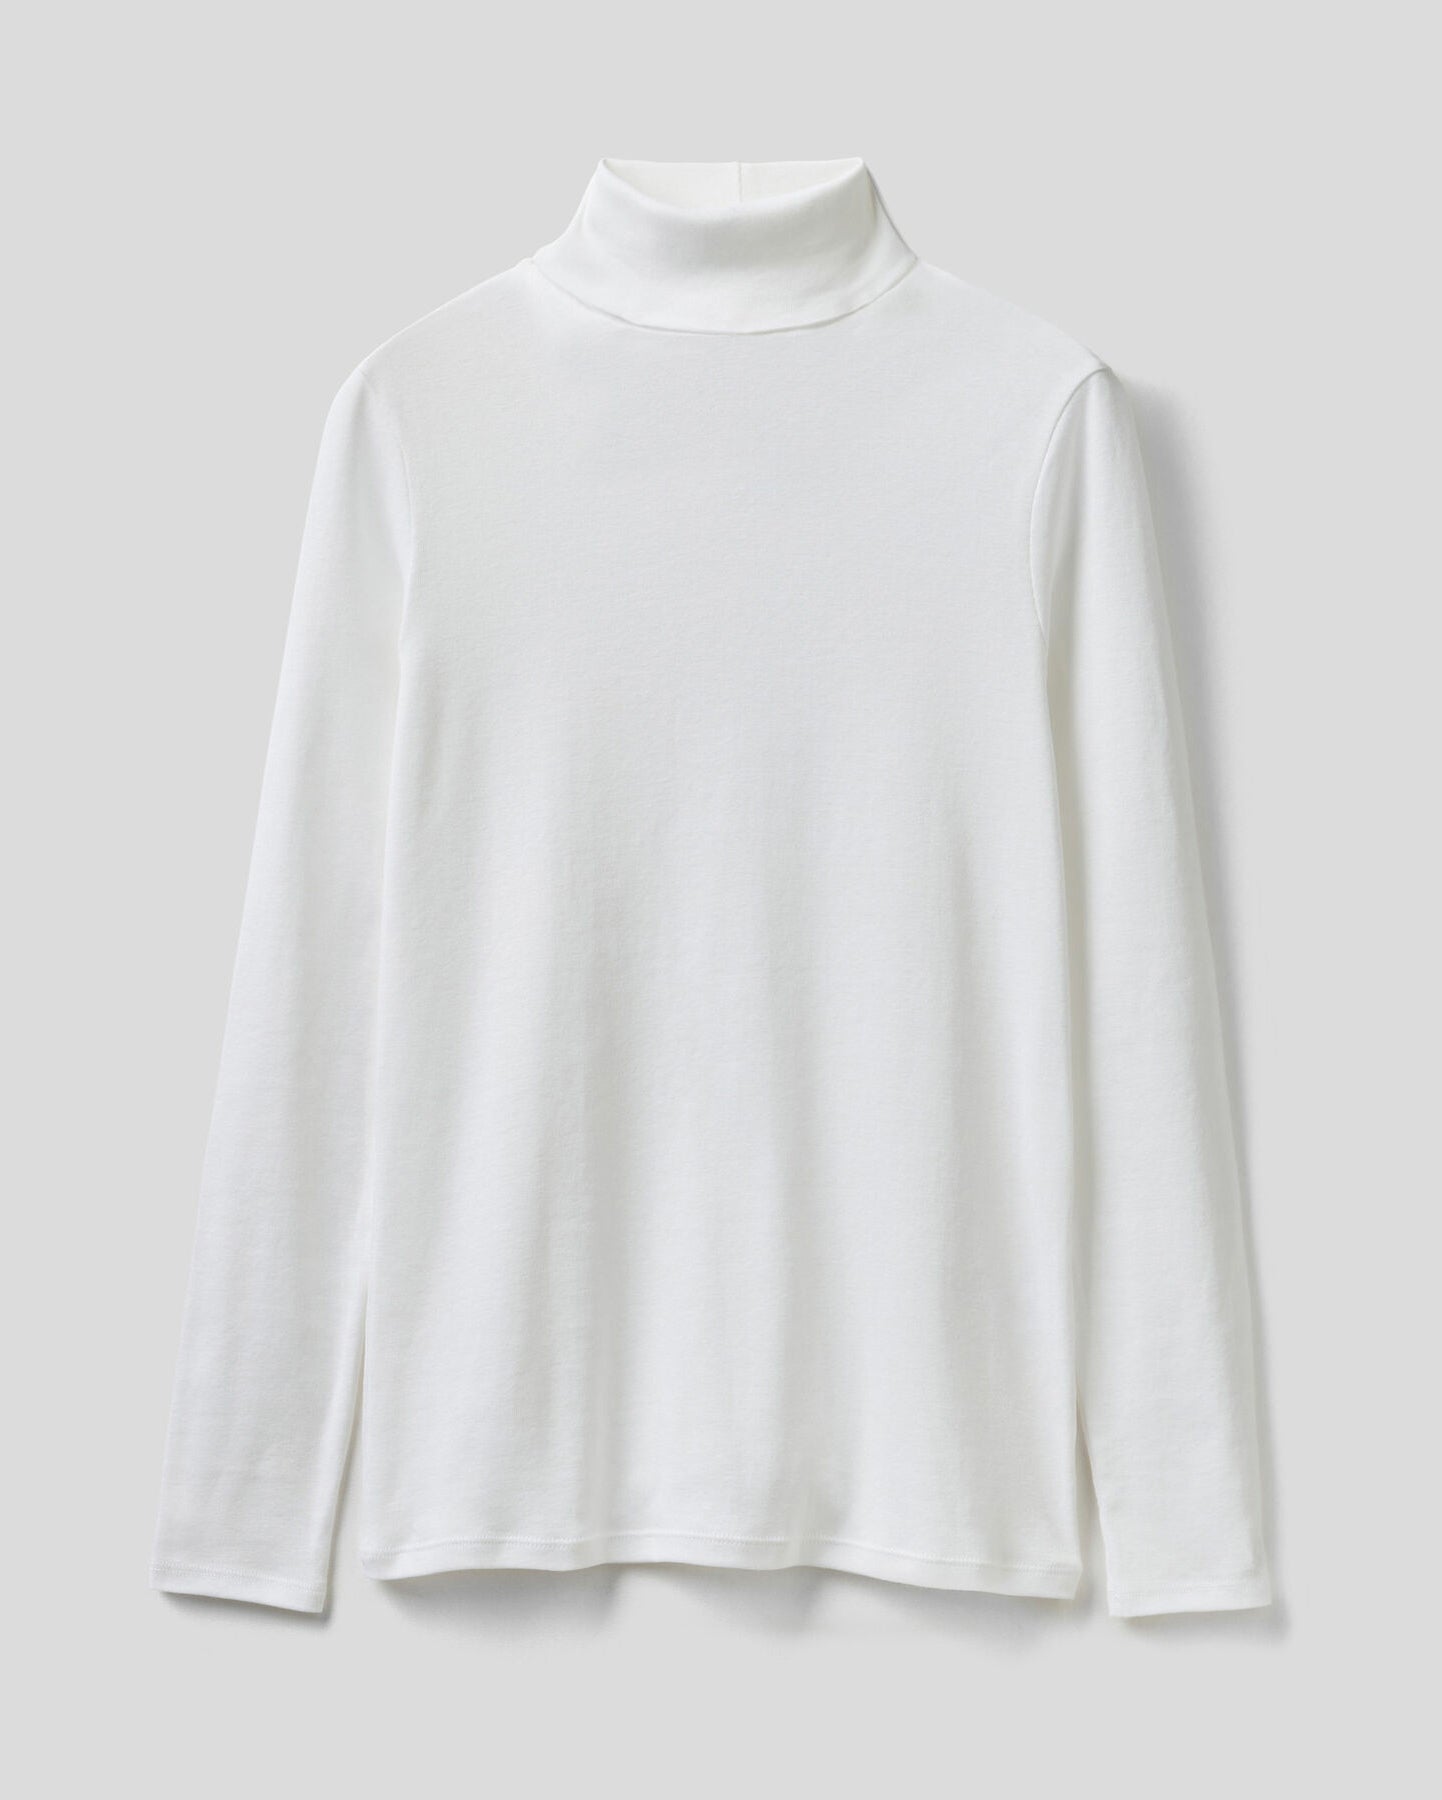 White Long Sleeve T-Shirt With High Neck